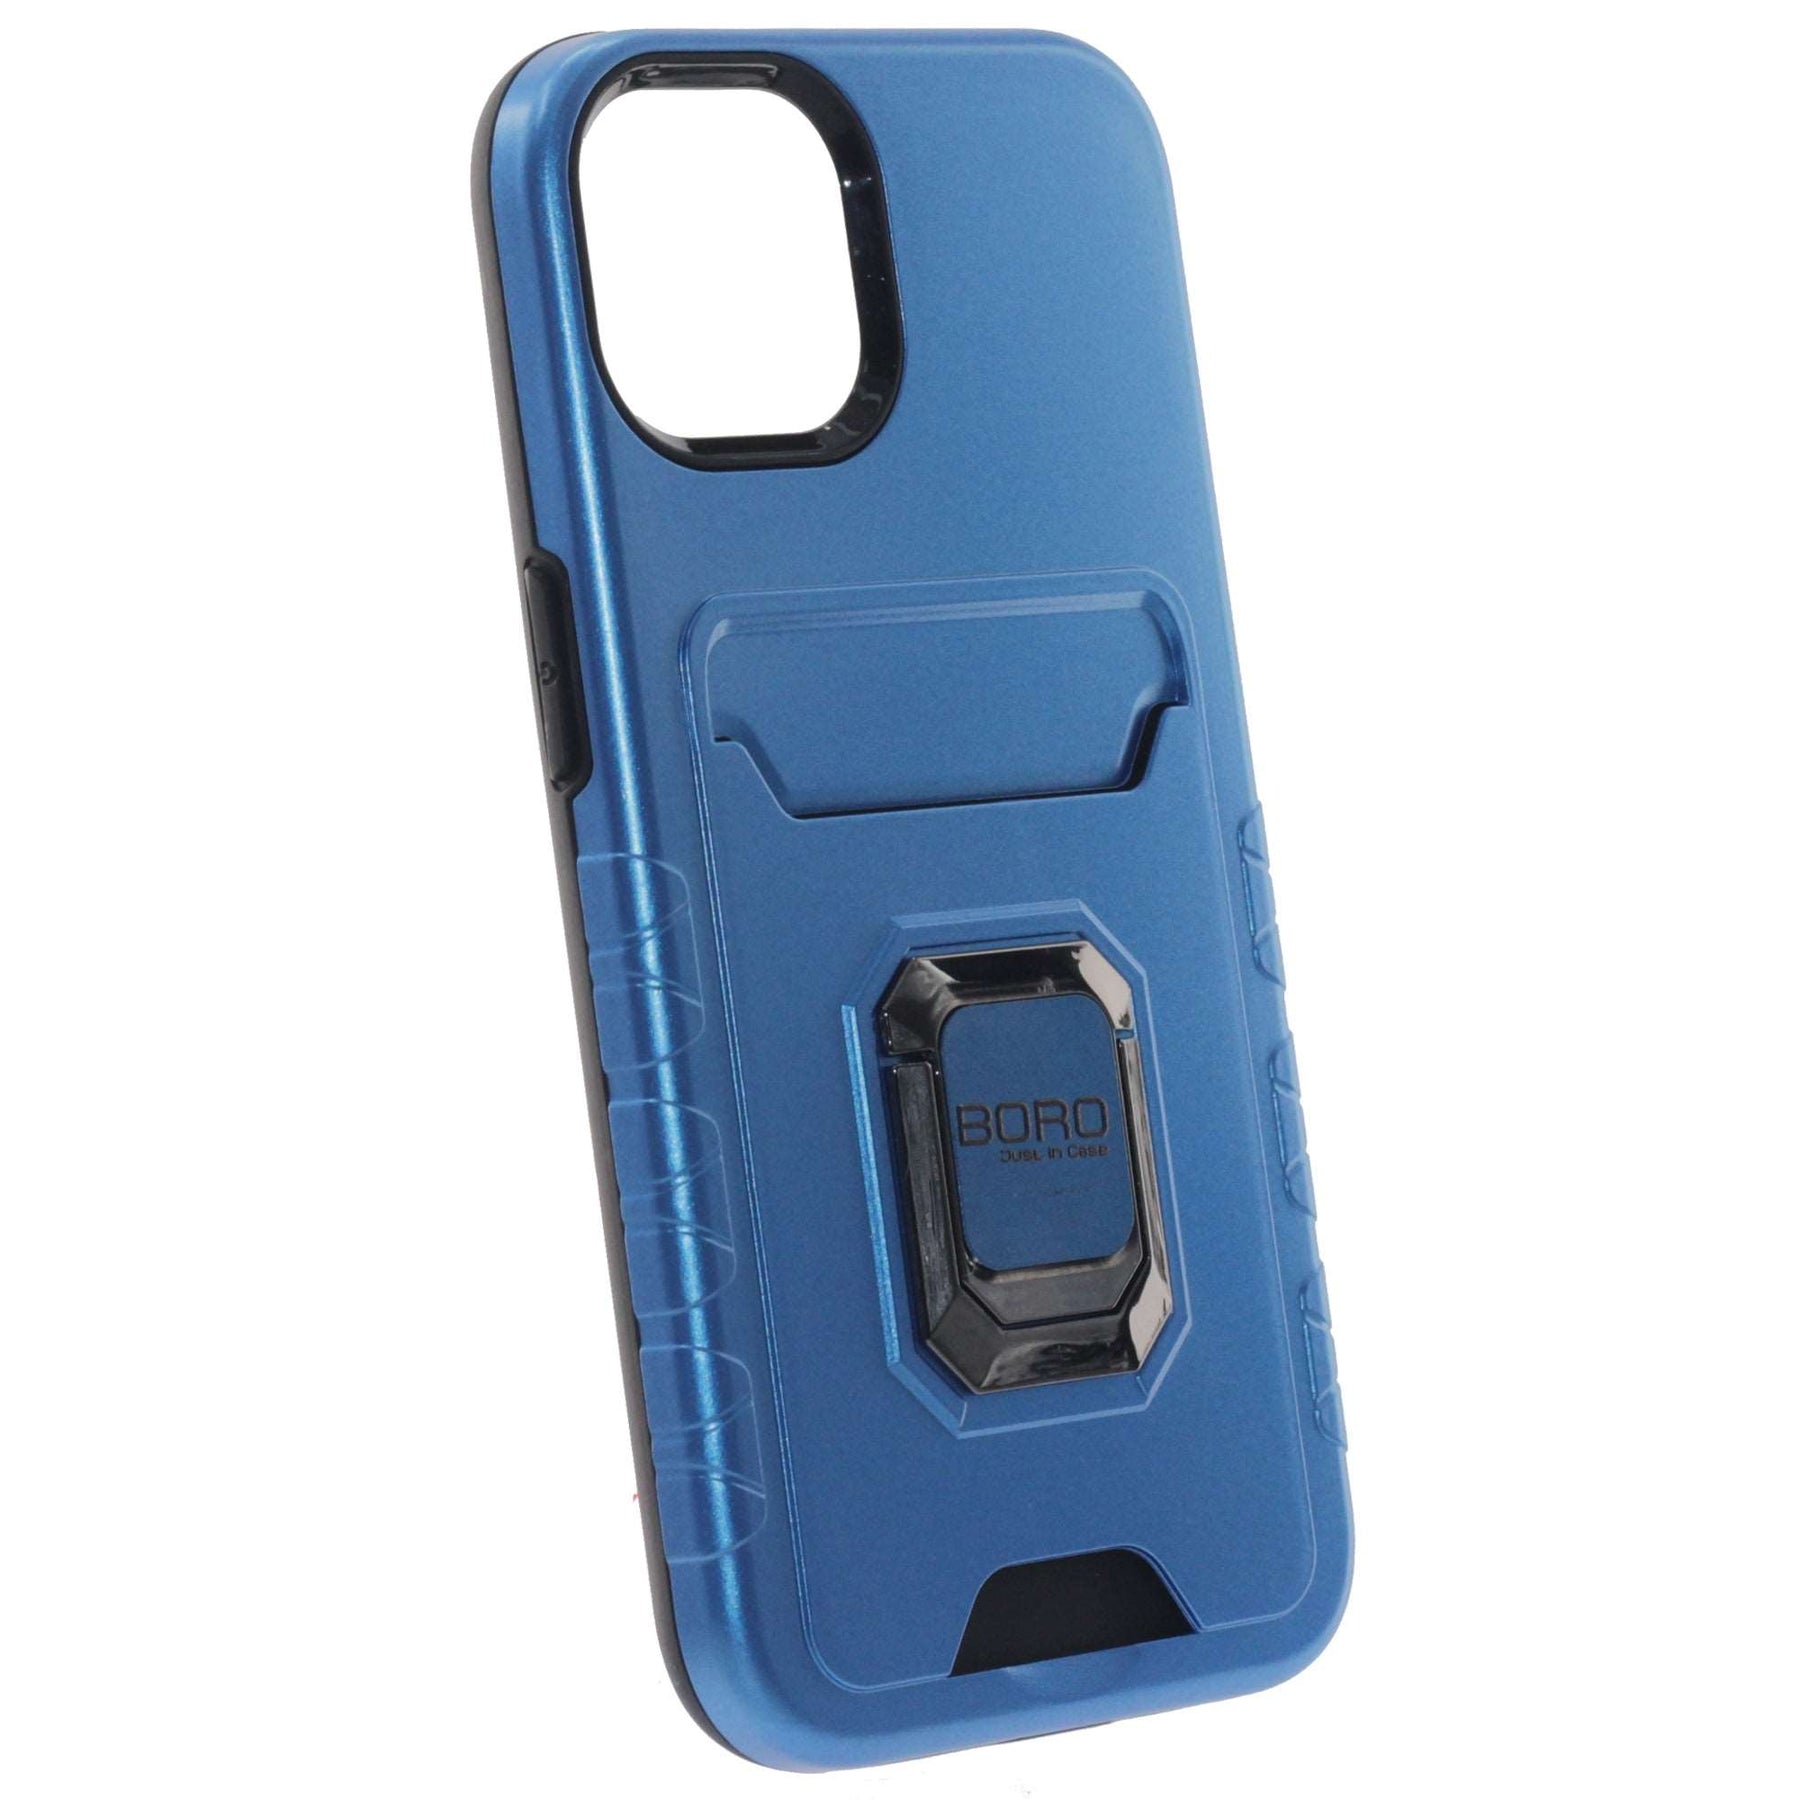 Apple iPhone 12 Pro Max, Case with Card Holder, Color Blue